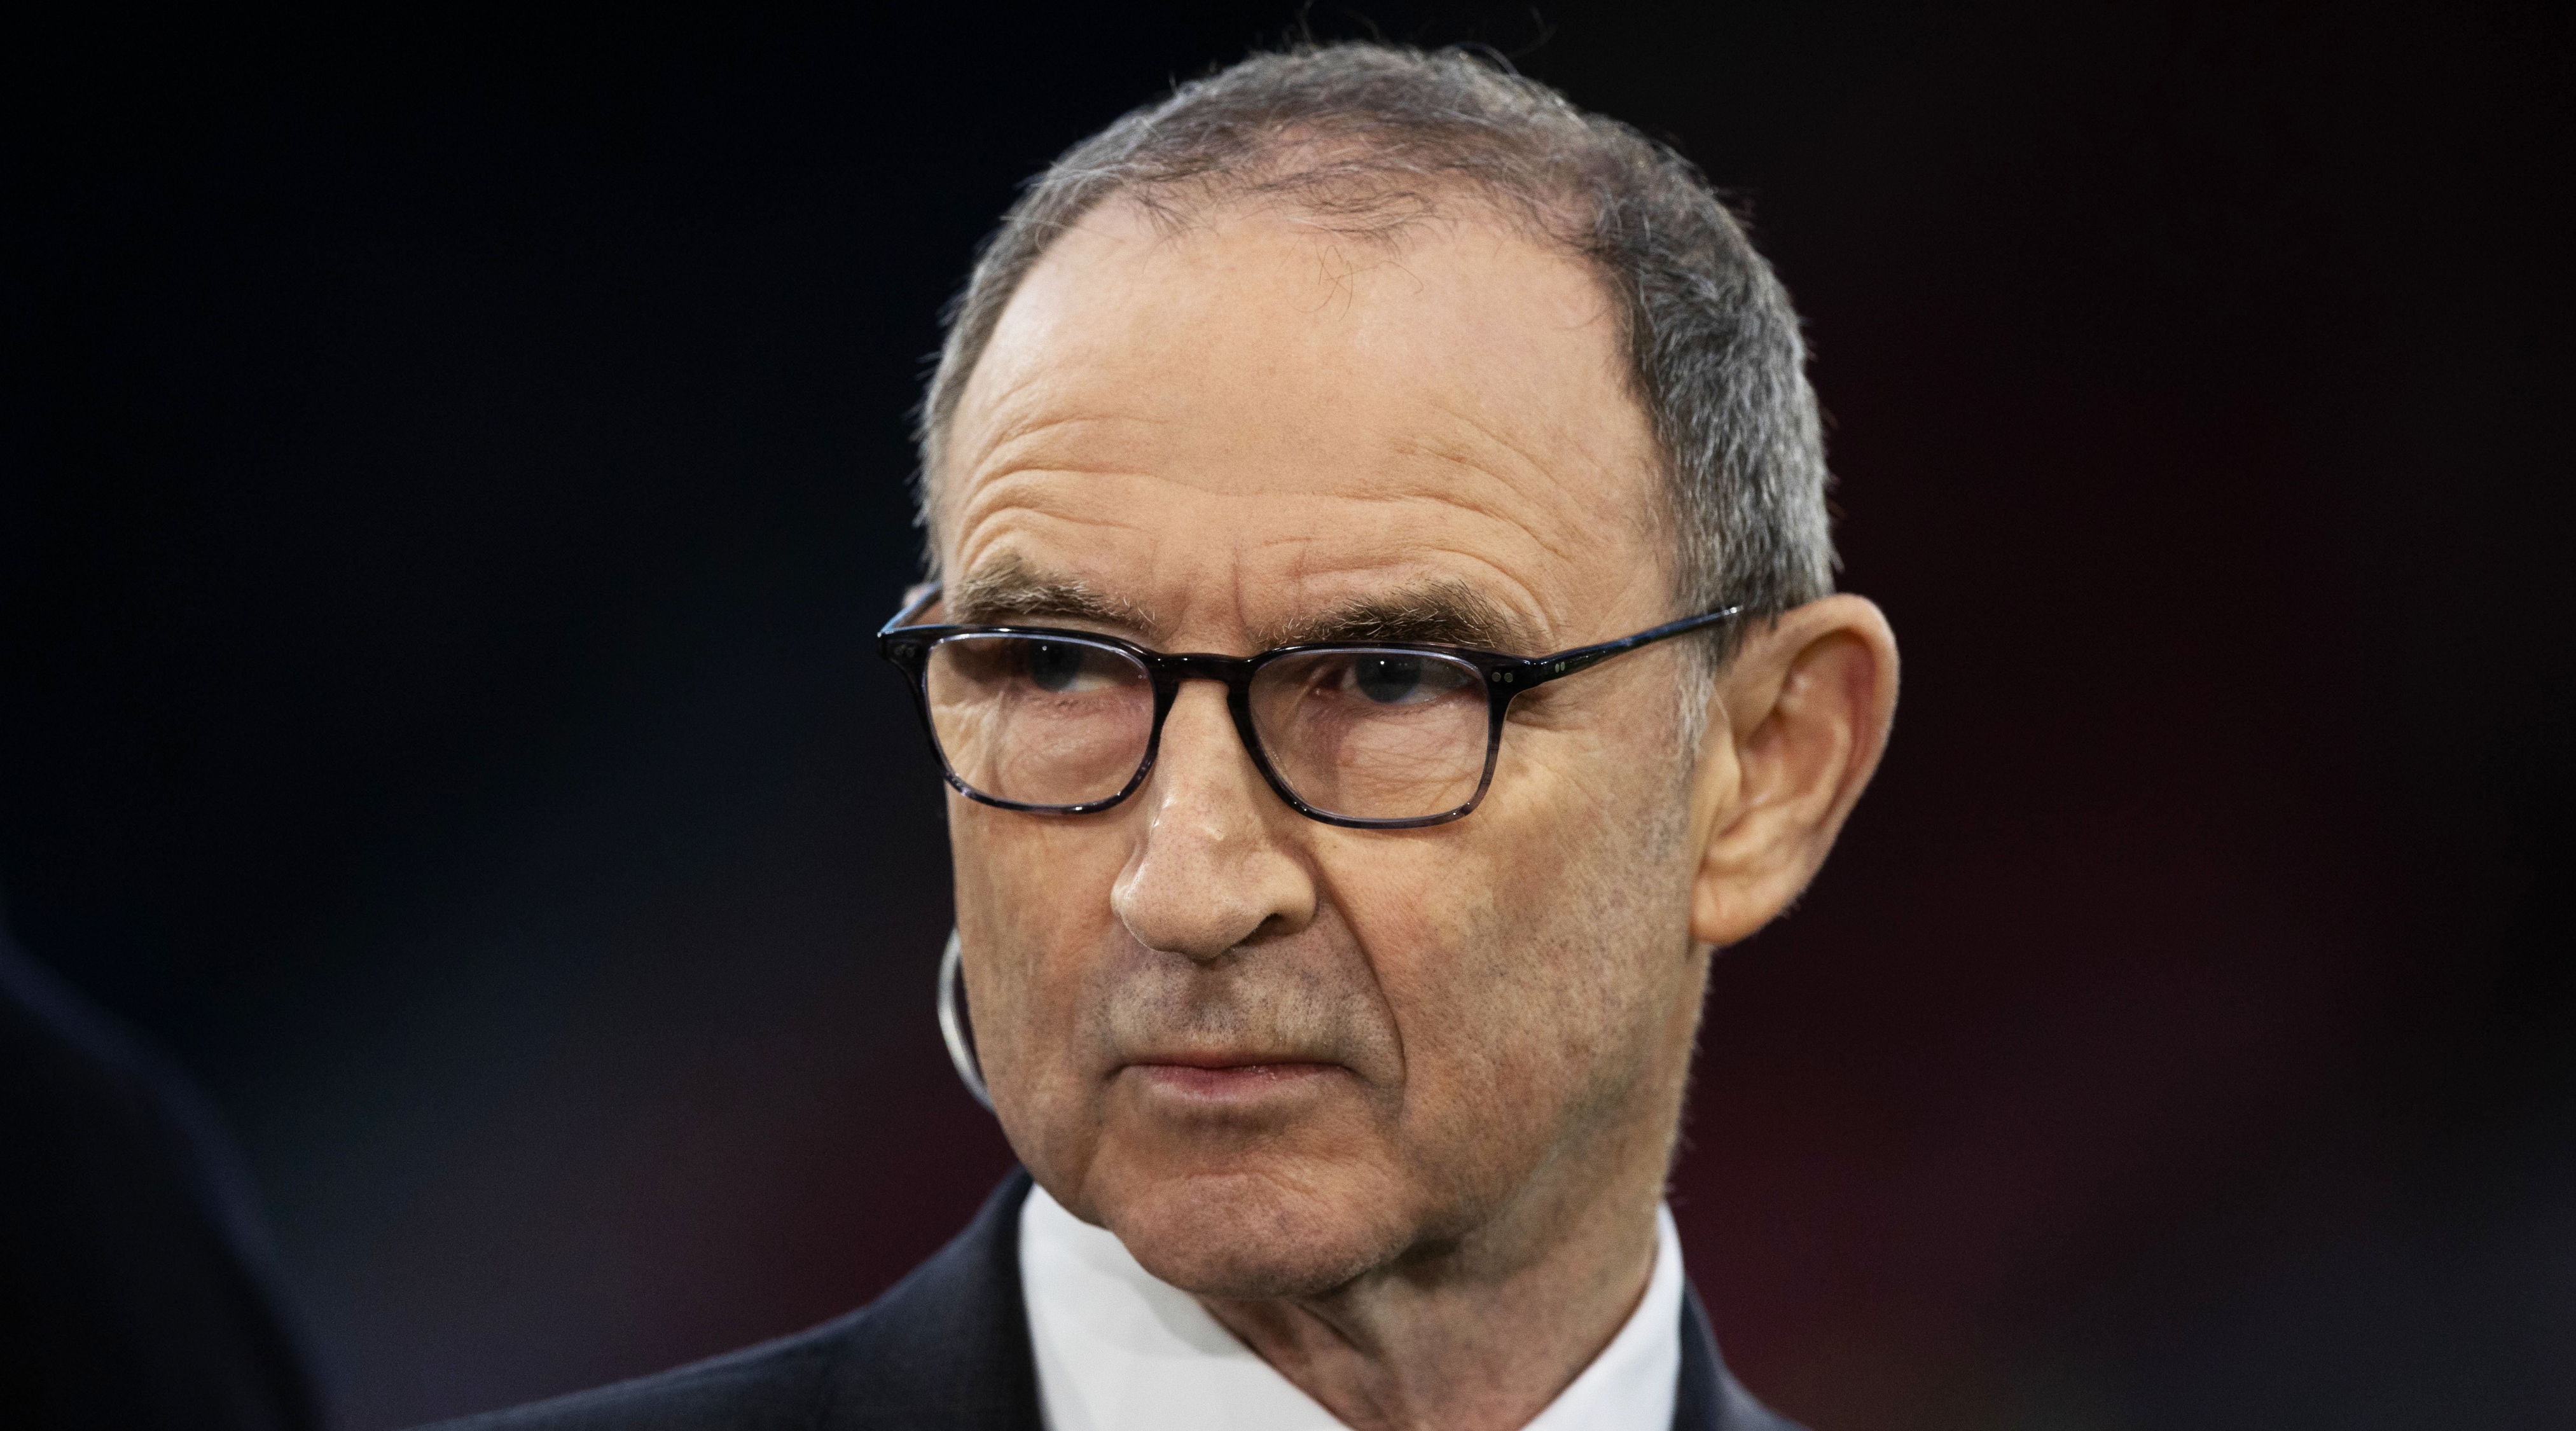 Football manager Martin O'Neill, pictured during a television broadcast of the UEFA Nations League match between Scotland and the Republic of Ireland on 24 September, 2022 at Hampden Park in Glasgow, United Kingdom